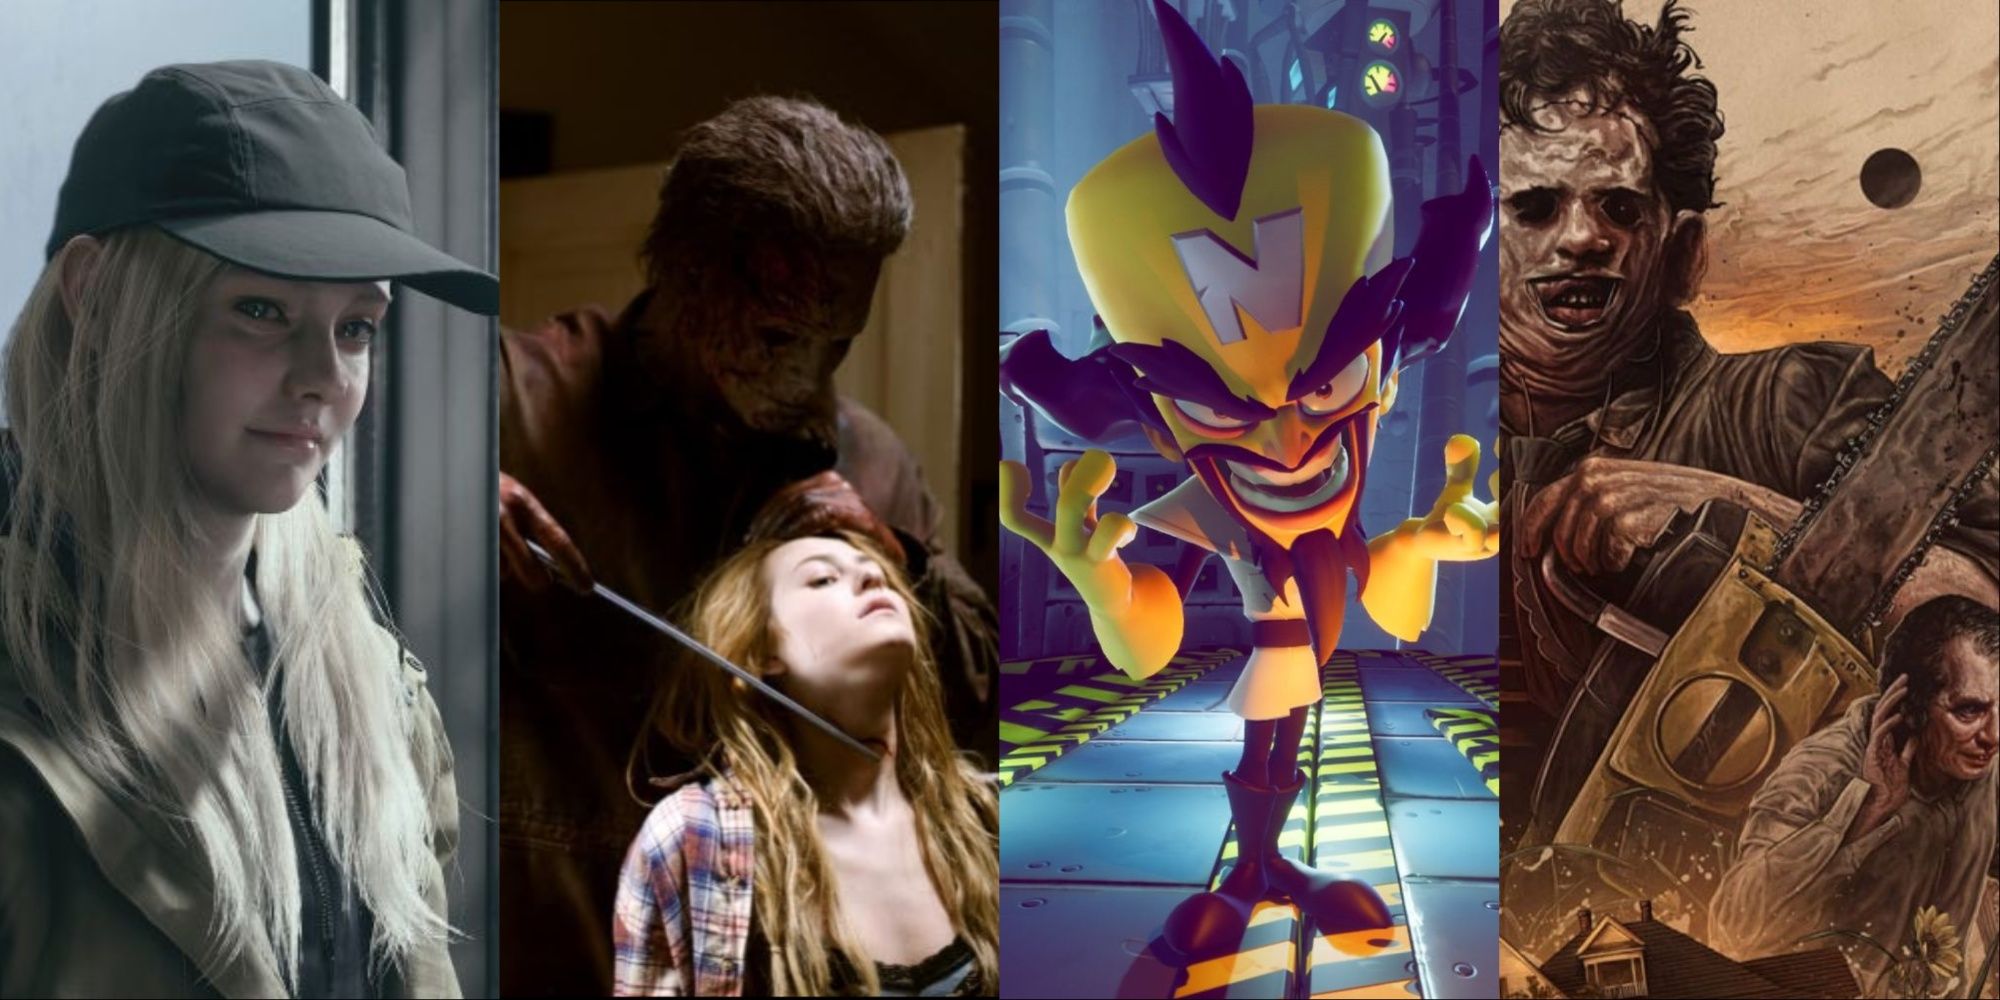 A four-image collage of Rose from RE Village, actress Scout Taylor-Compton held at knife point by Michael Myers, Lex Lang's Dr. Neo Cortex from Crash Bandicoot 4, and the cover art of the game with Leatherface and Cook.